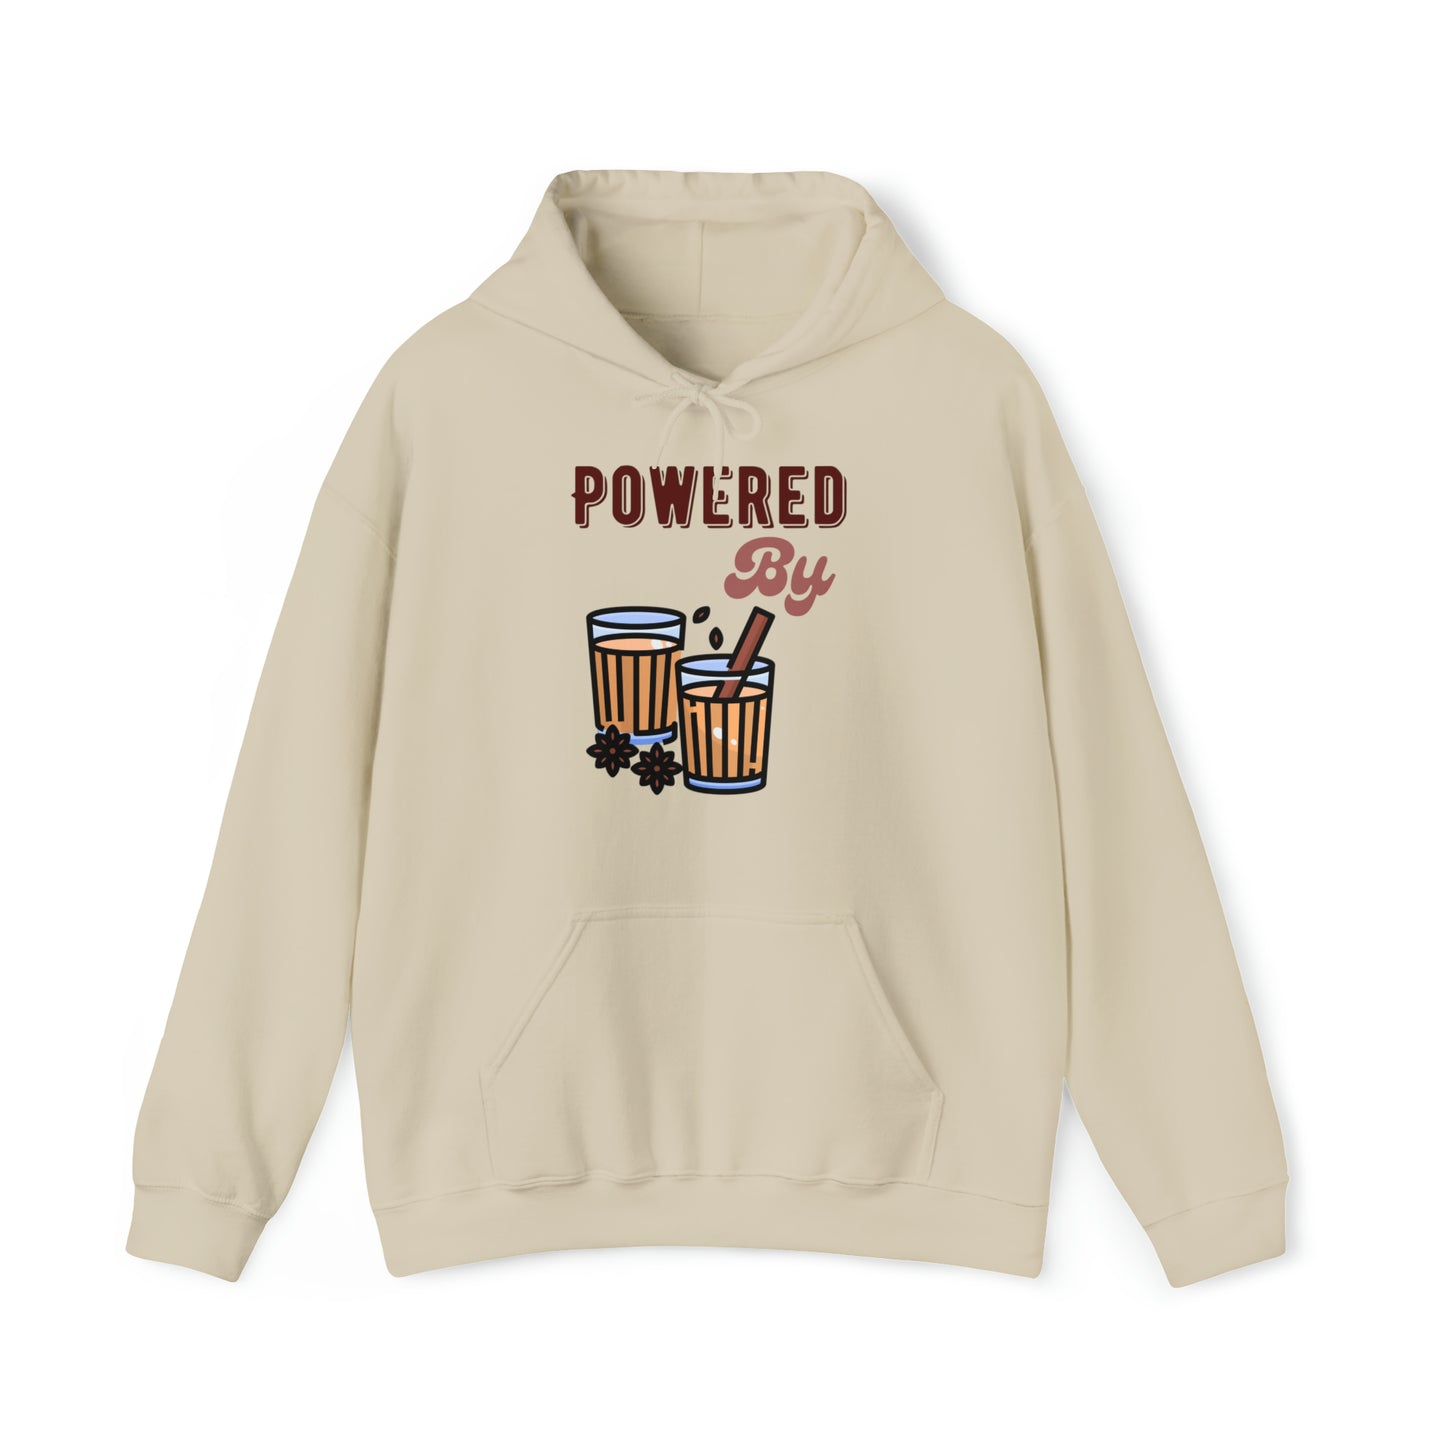 "Powered by Chai" Unisex Heavy Blend™ Hooded Sweatshirt - Available in 5 Colors | Sizes S to 3XL